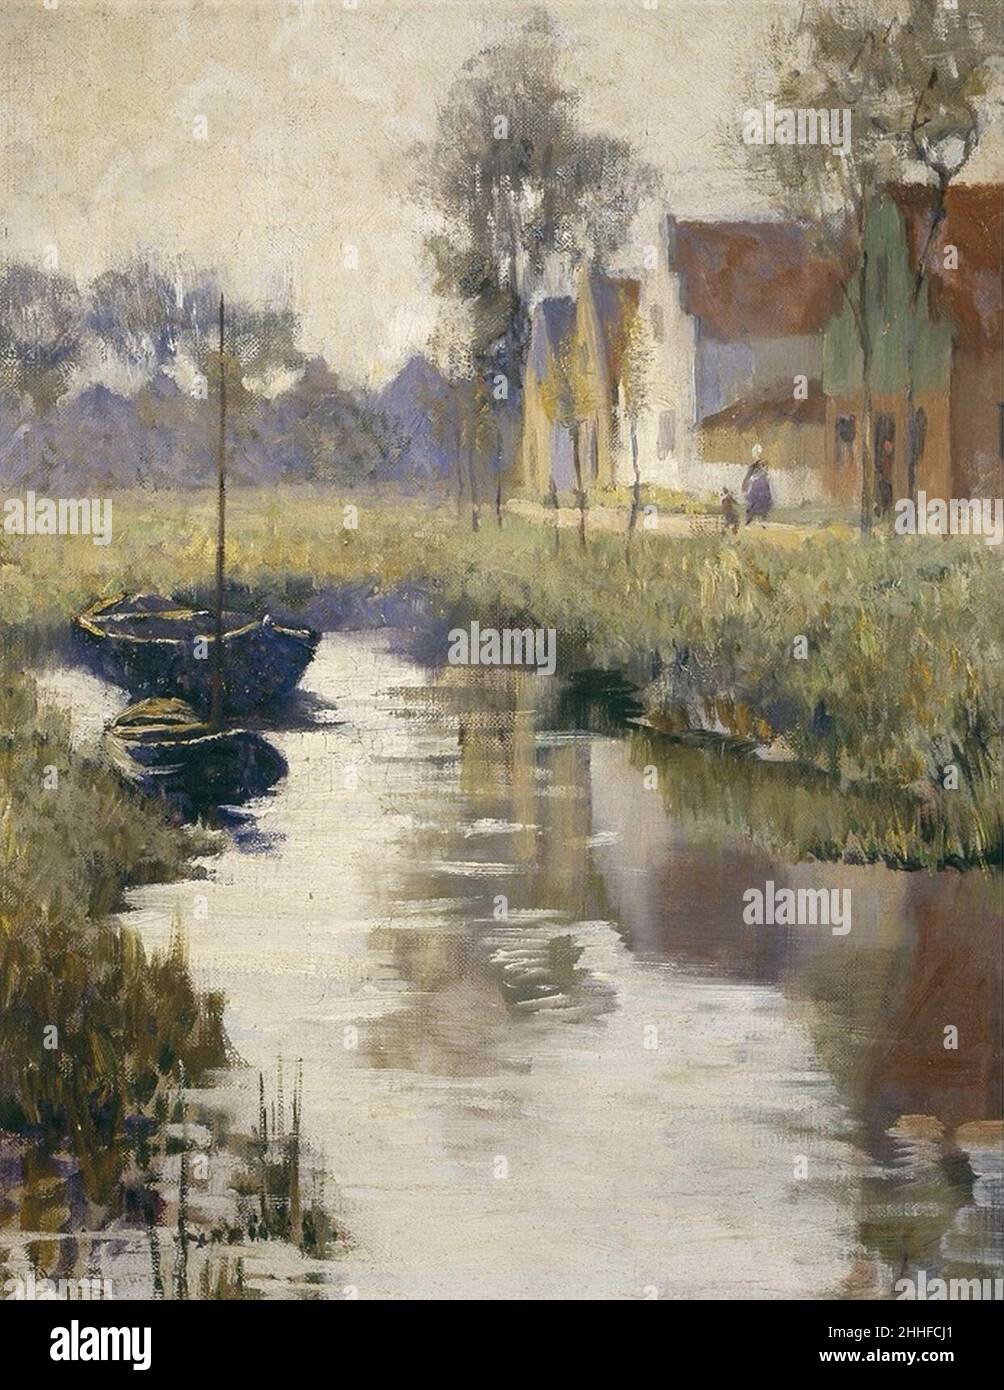 Stanley, Houses by a canal, Rijsoord. Stock Photo